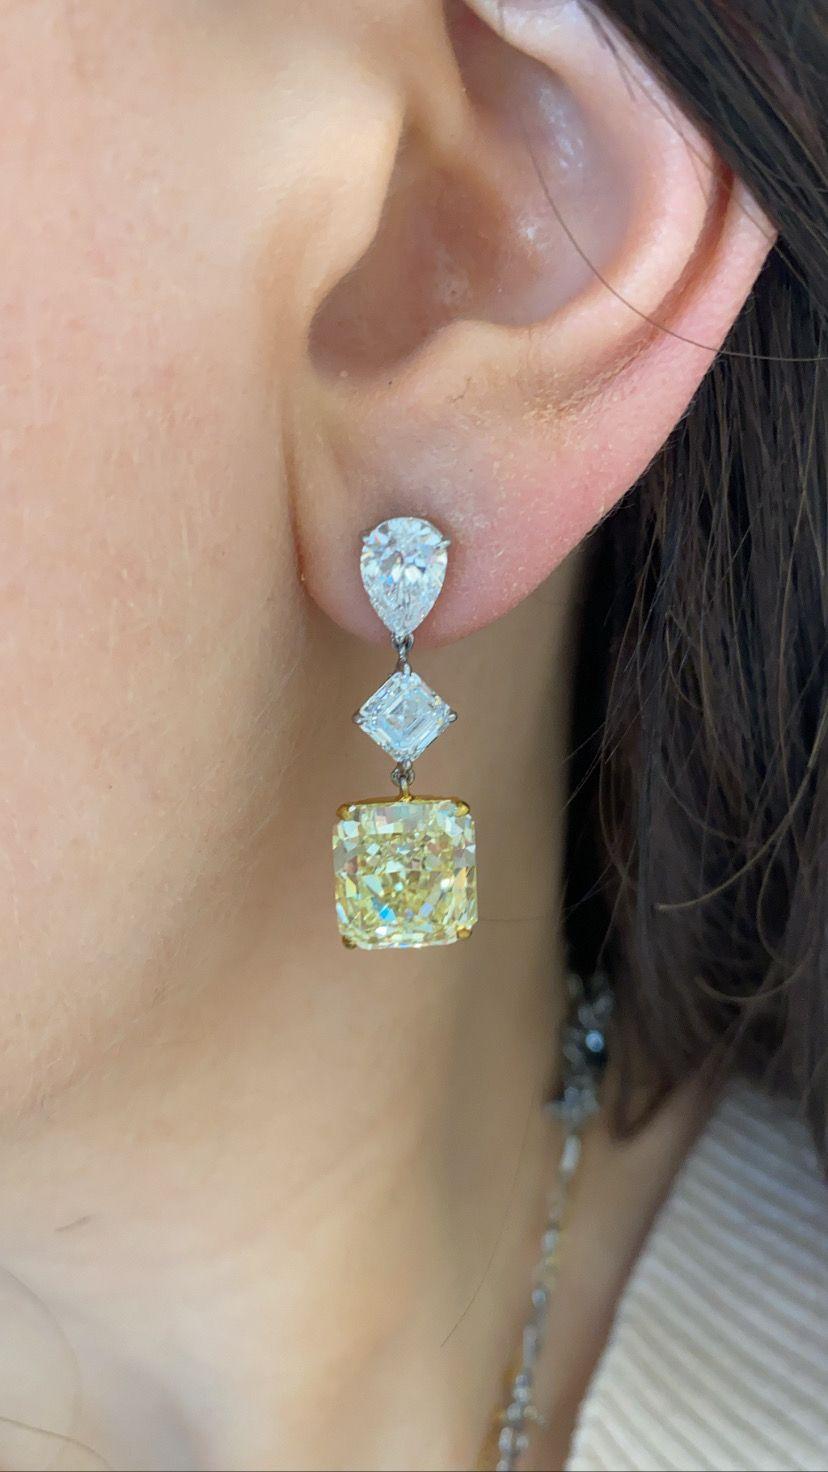 Matching pair of radiant shape fancy yellow diamond Earrings
The fancy yellow radiant diamonds are 12.42 ctw.
Accompanied by GIA Lab Colored Diamond Reports.
Each yellow diamond suspends from a 1.00 carat asscher cut diamond wit a pear shaped stud